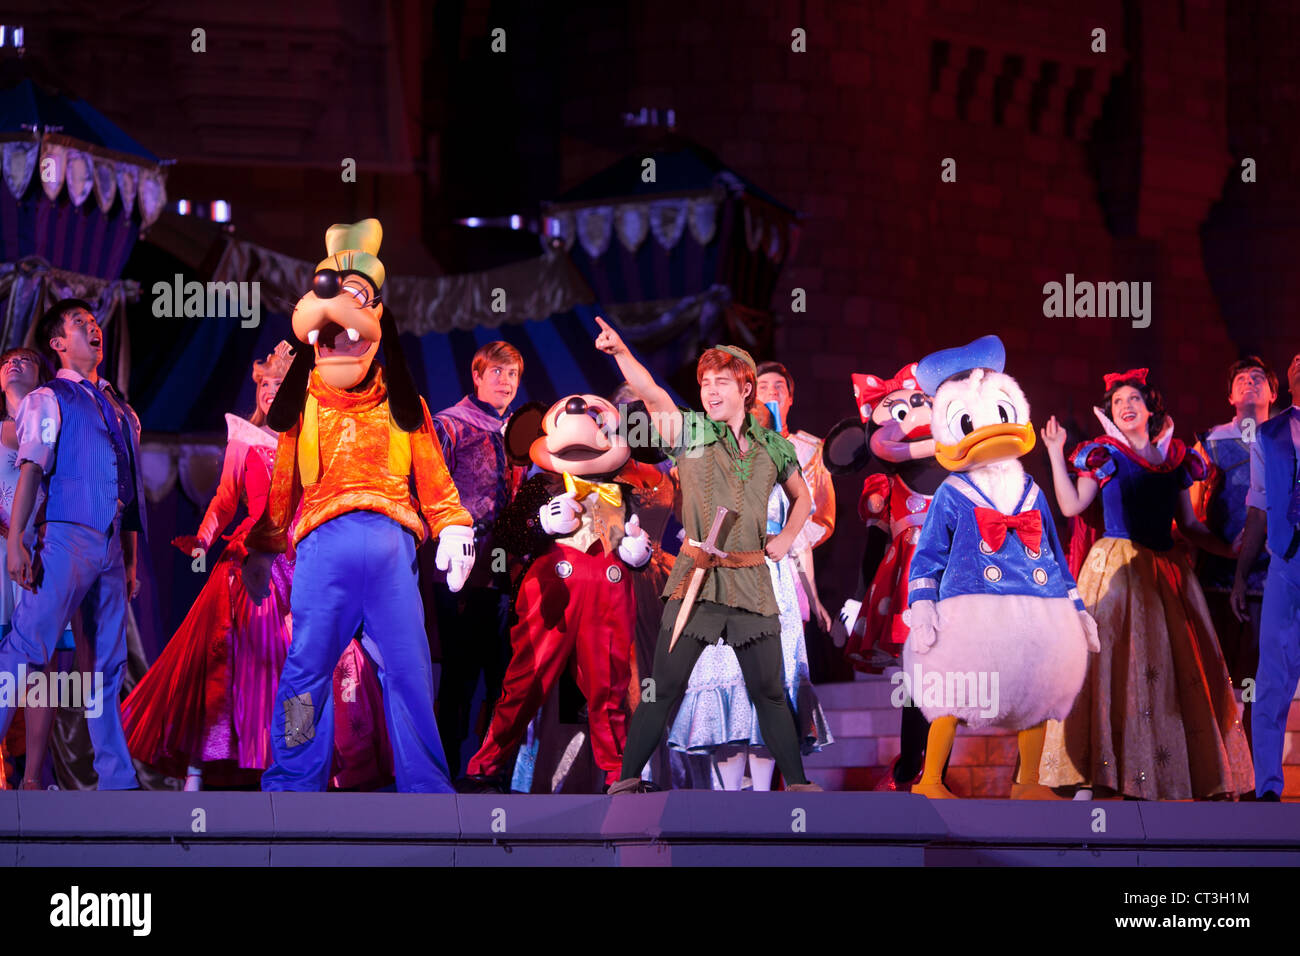 Peter Pan with other Disney Characters in Magic Kingdom, Disney World, Orlando, Florida Stock Photo